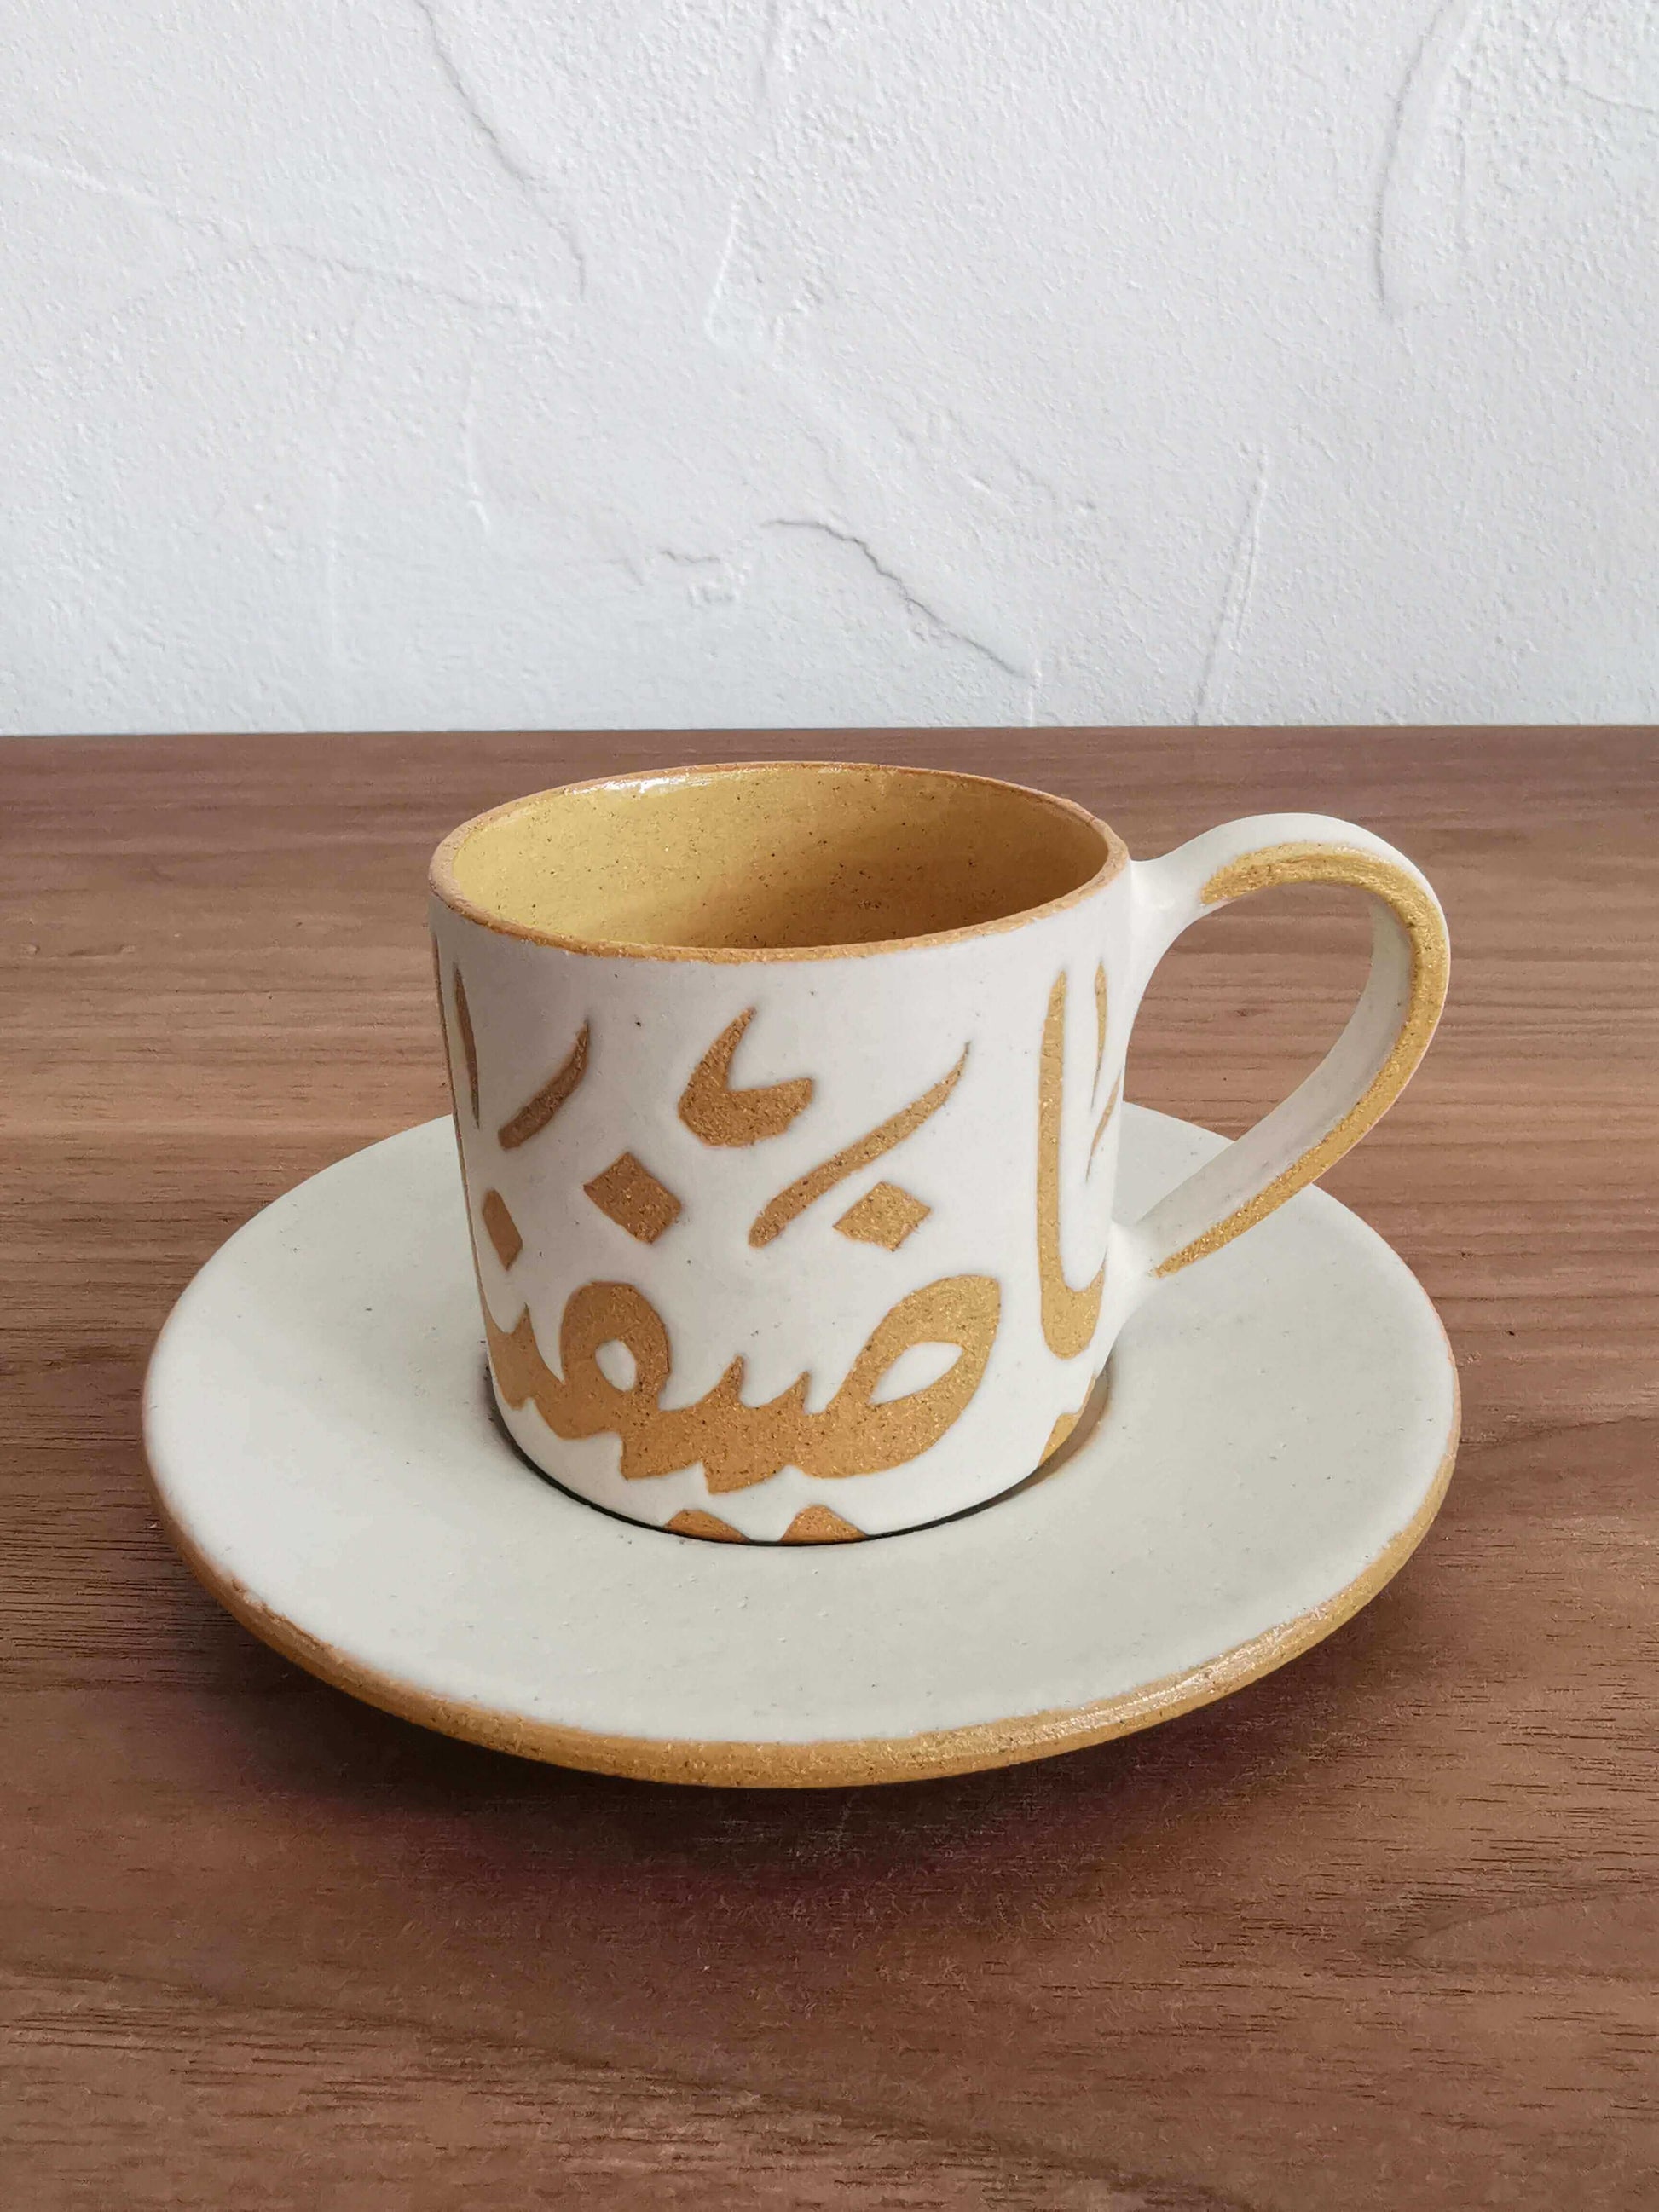 handmade pottery cup, pottery handmade, ceramic handmade pottery, Pottery dinnerware, handmade cup, Ramadan gift, mothers day gift, house warming gift, pottery cup medium, Arabic calligraphy art, handwritten calligraphy, handwritten Arabic calligraphy